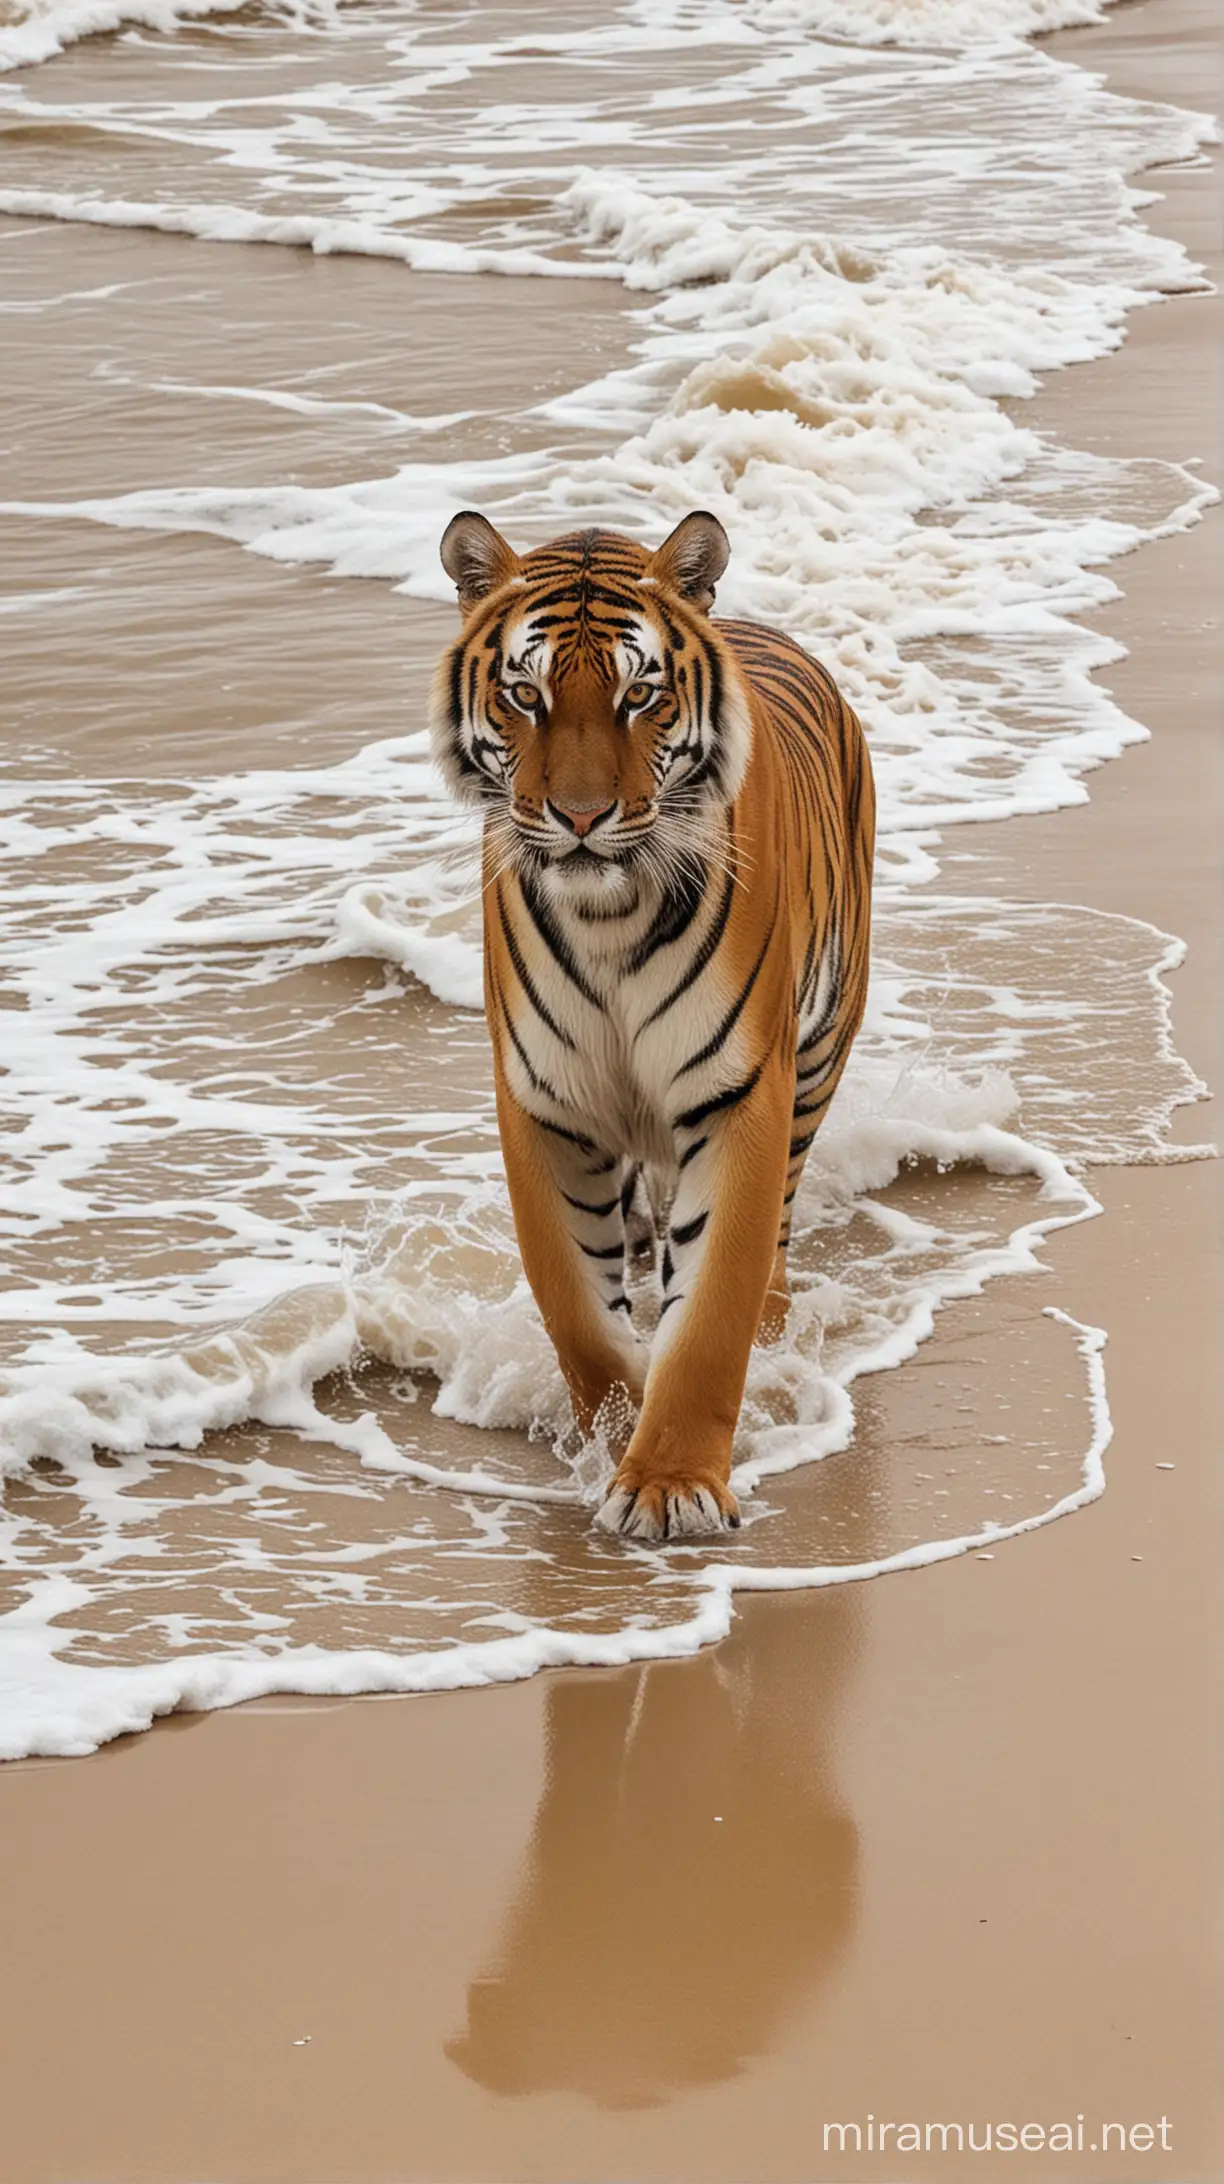 The tiger was on the beach, many people saw it,waves